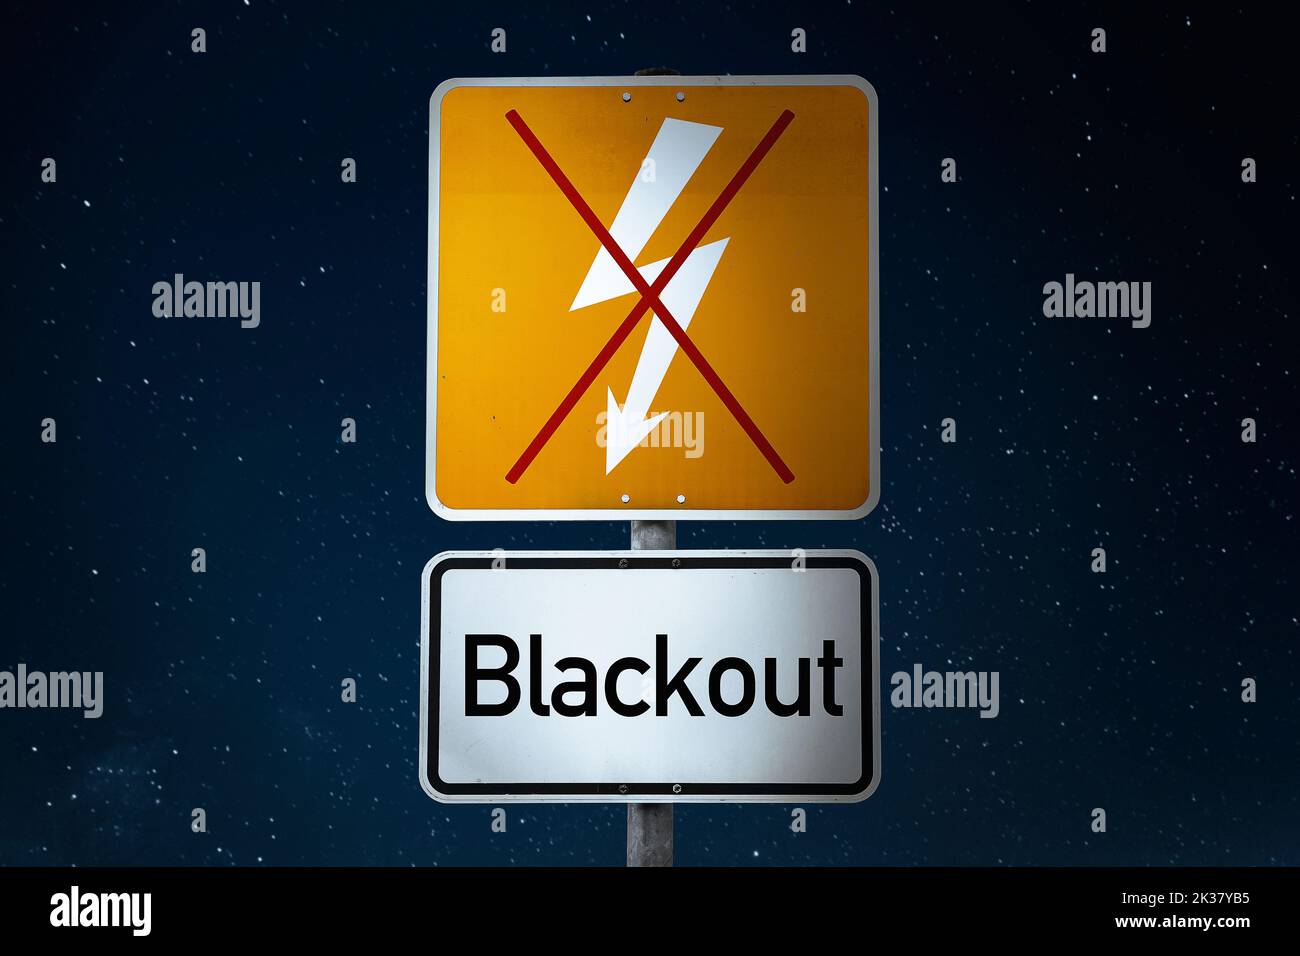 Sign At Night With The Inscription: Blackout, Black Out, Power Outage PHOTOMONTAGE Stock Photo